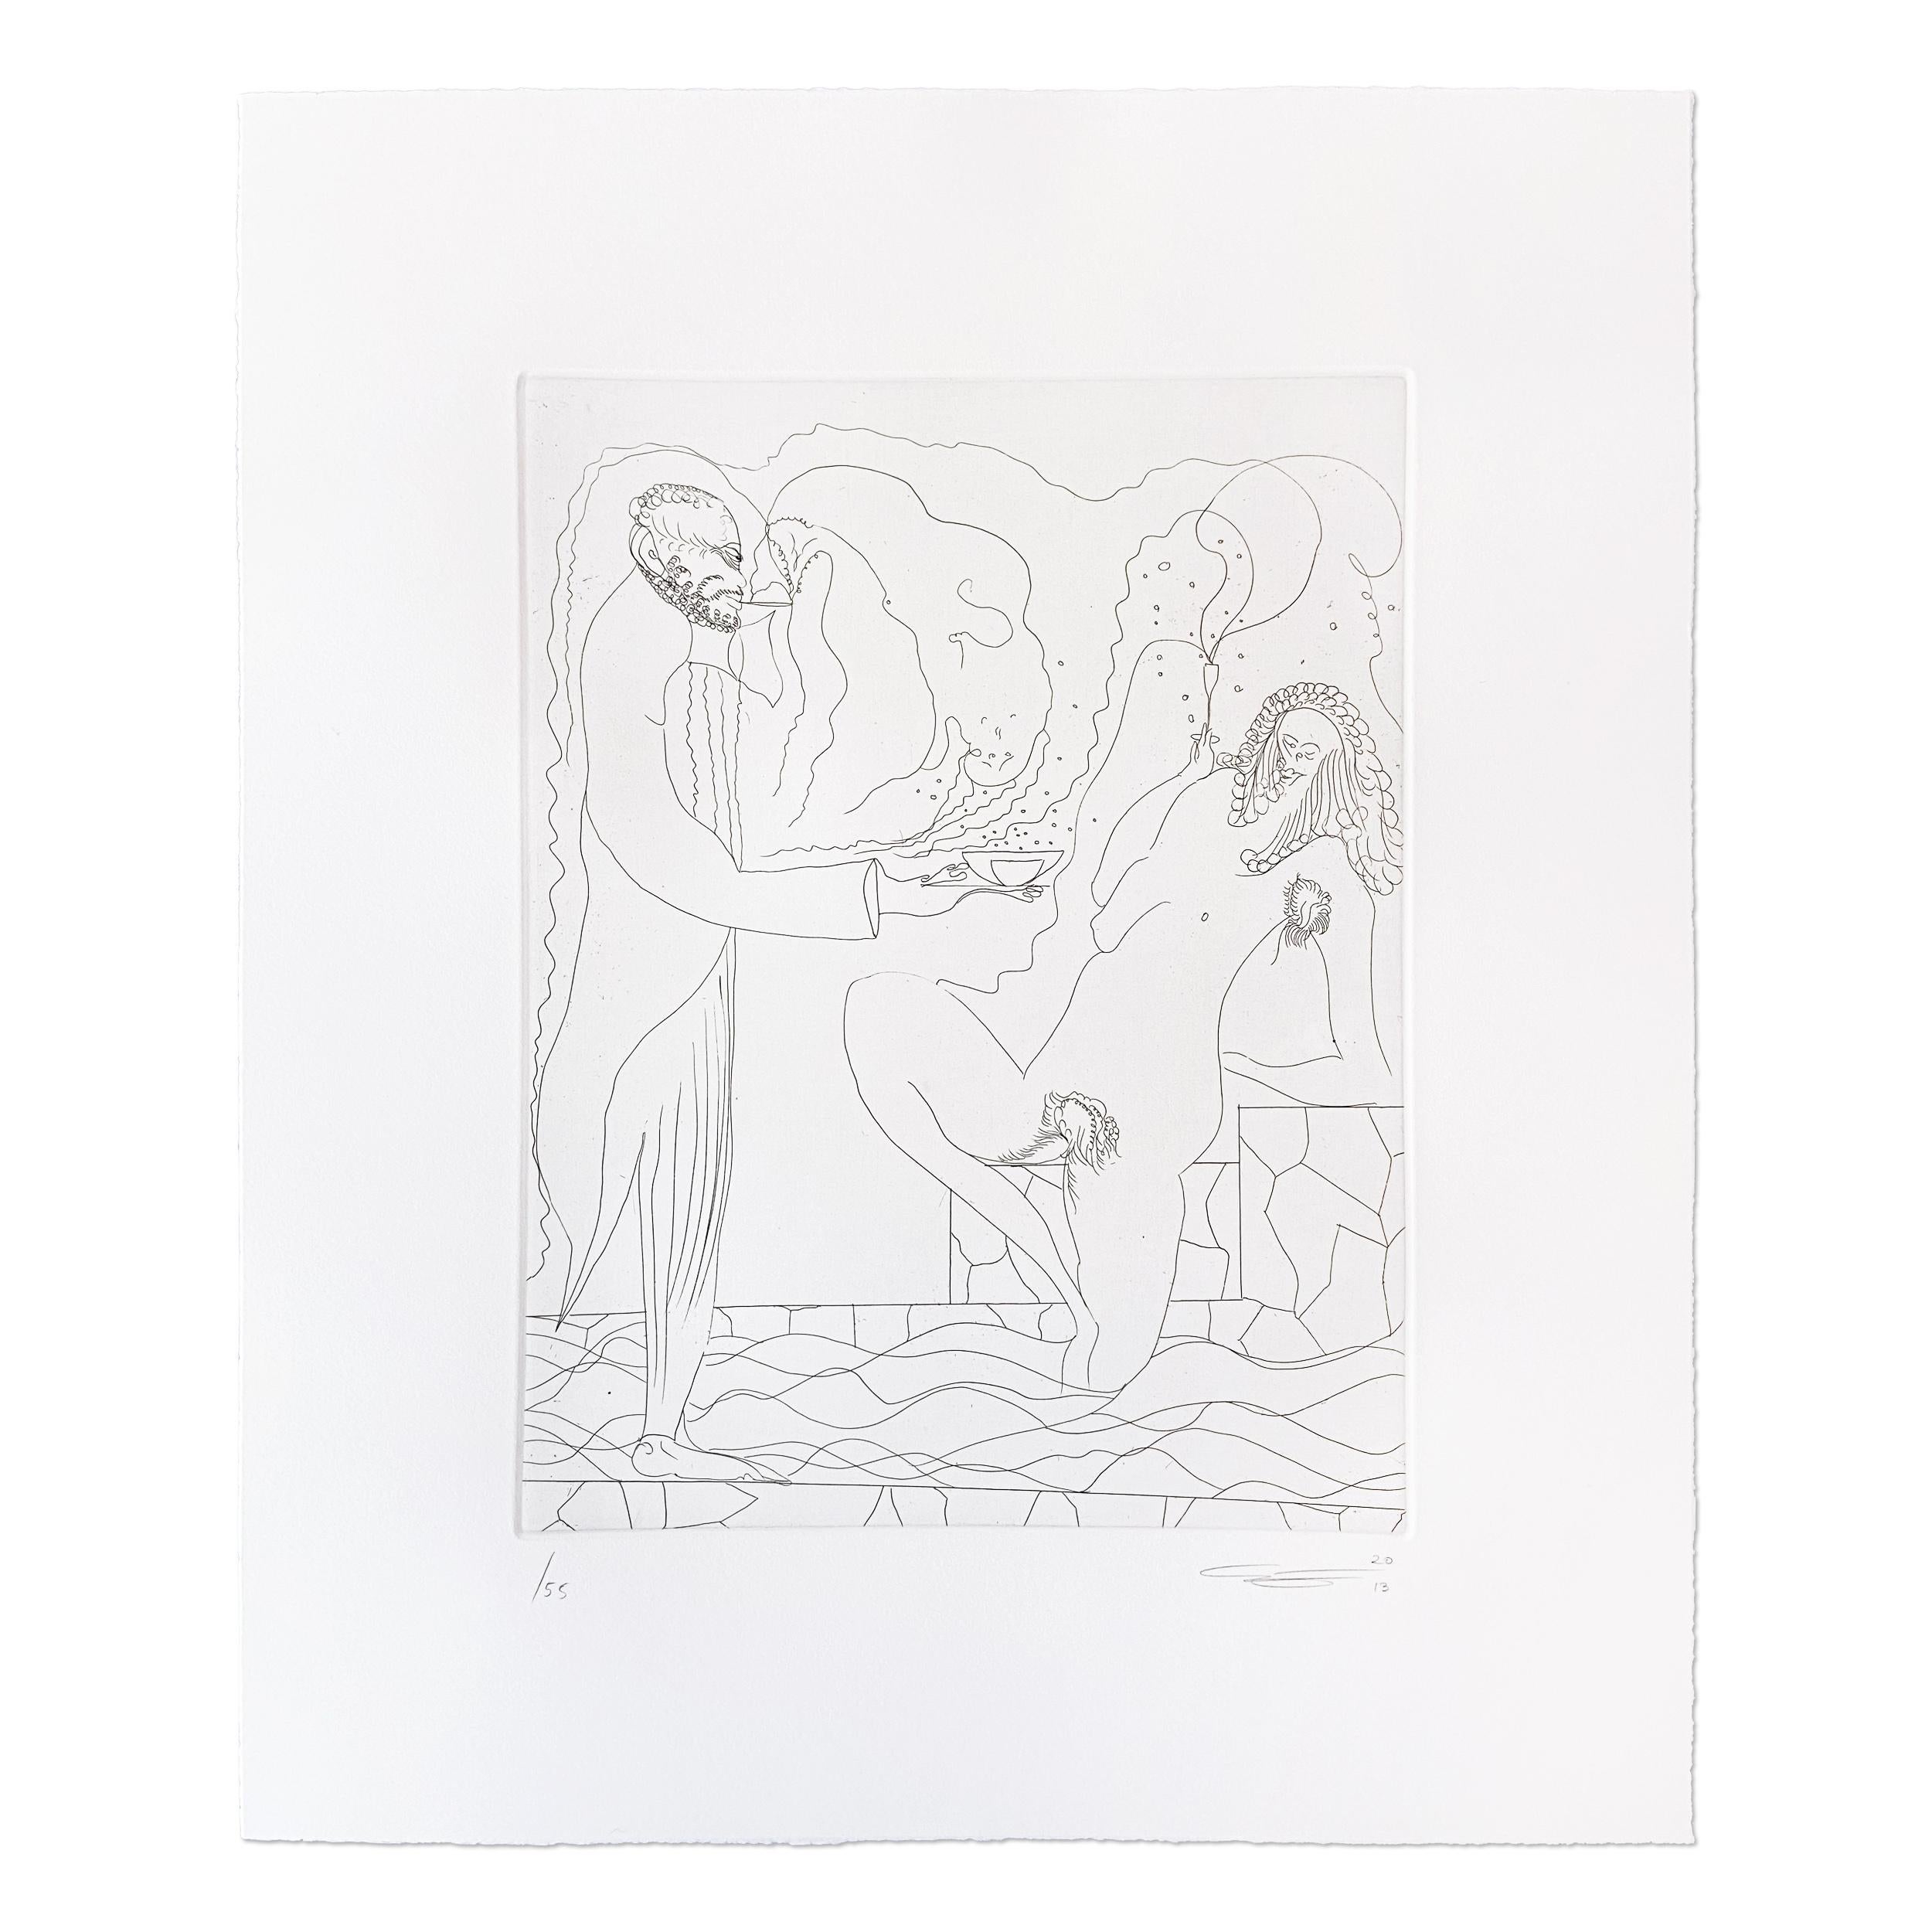 Chris Ofili (born 1968 in Manchester)
Poolside, 2013
Medium: Etching on wove paper
Dimensions: 45.1 x 35.6 cm (17.75 x 14 in)
Edition of 55: Hand-signed and numbered
Condition: Mint